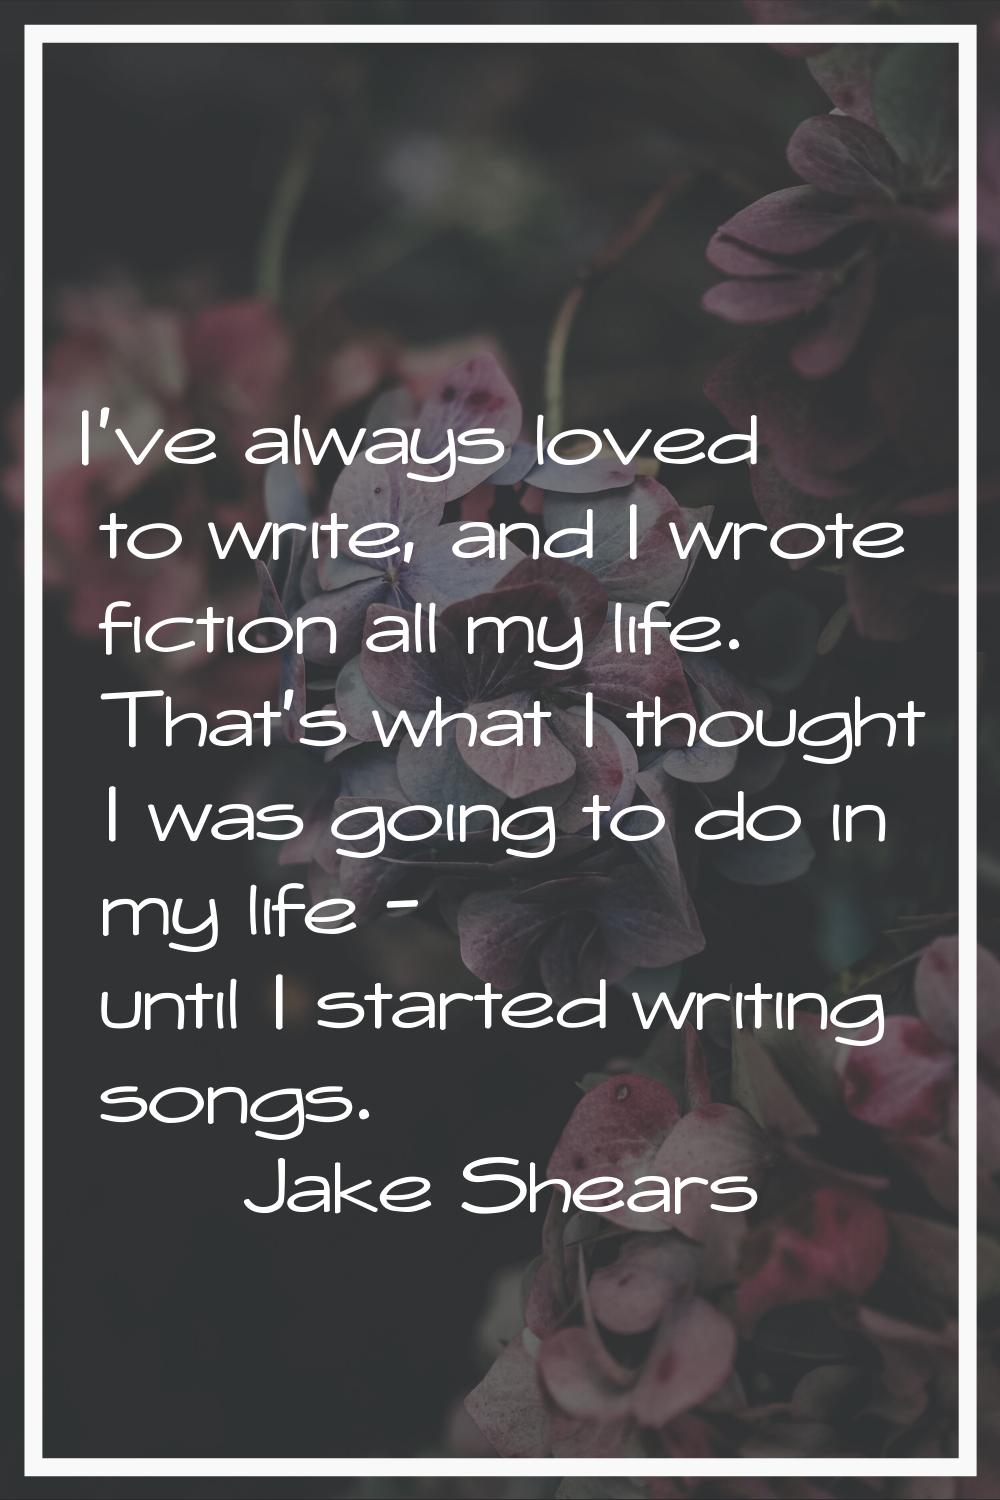 I've always loved to write, and I wrote fiction all my life. That's what I thought I was going to d